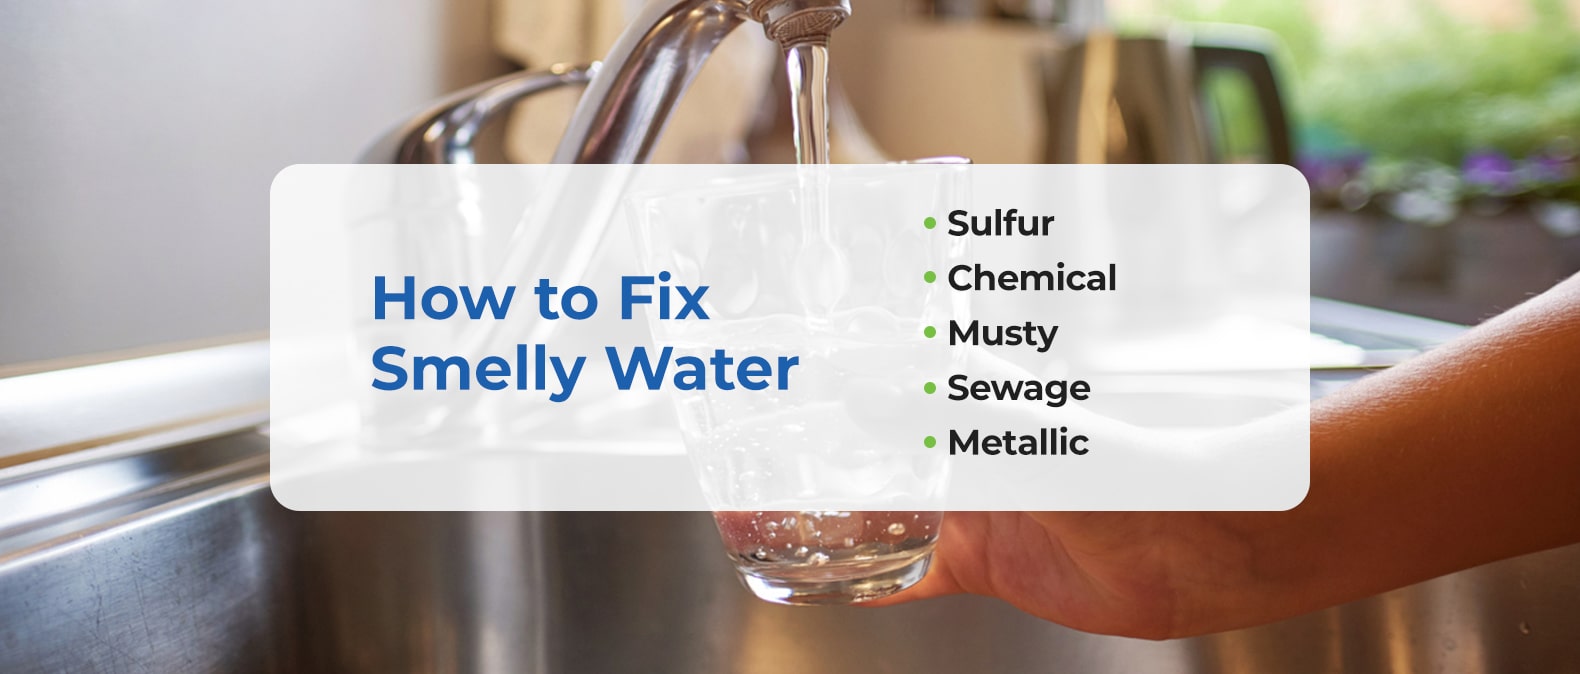 How to Fix Smelly Water